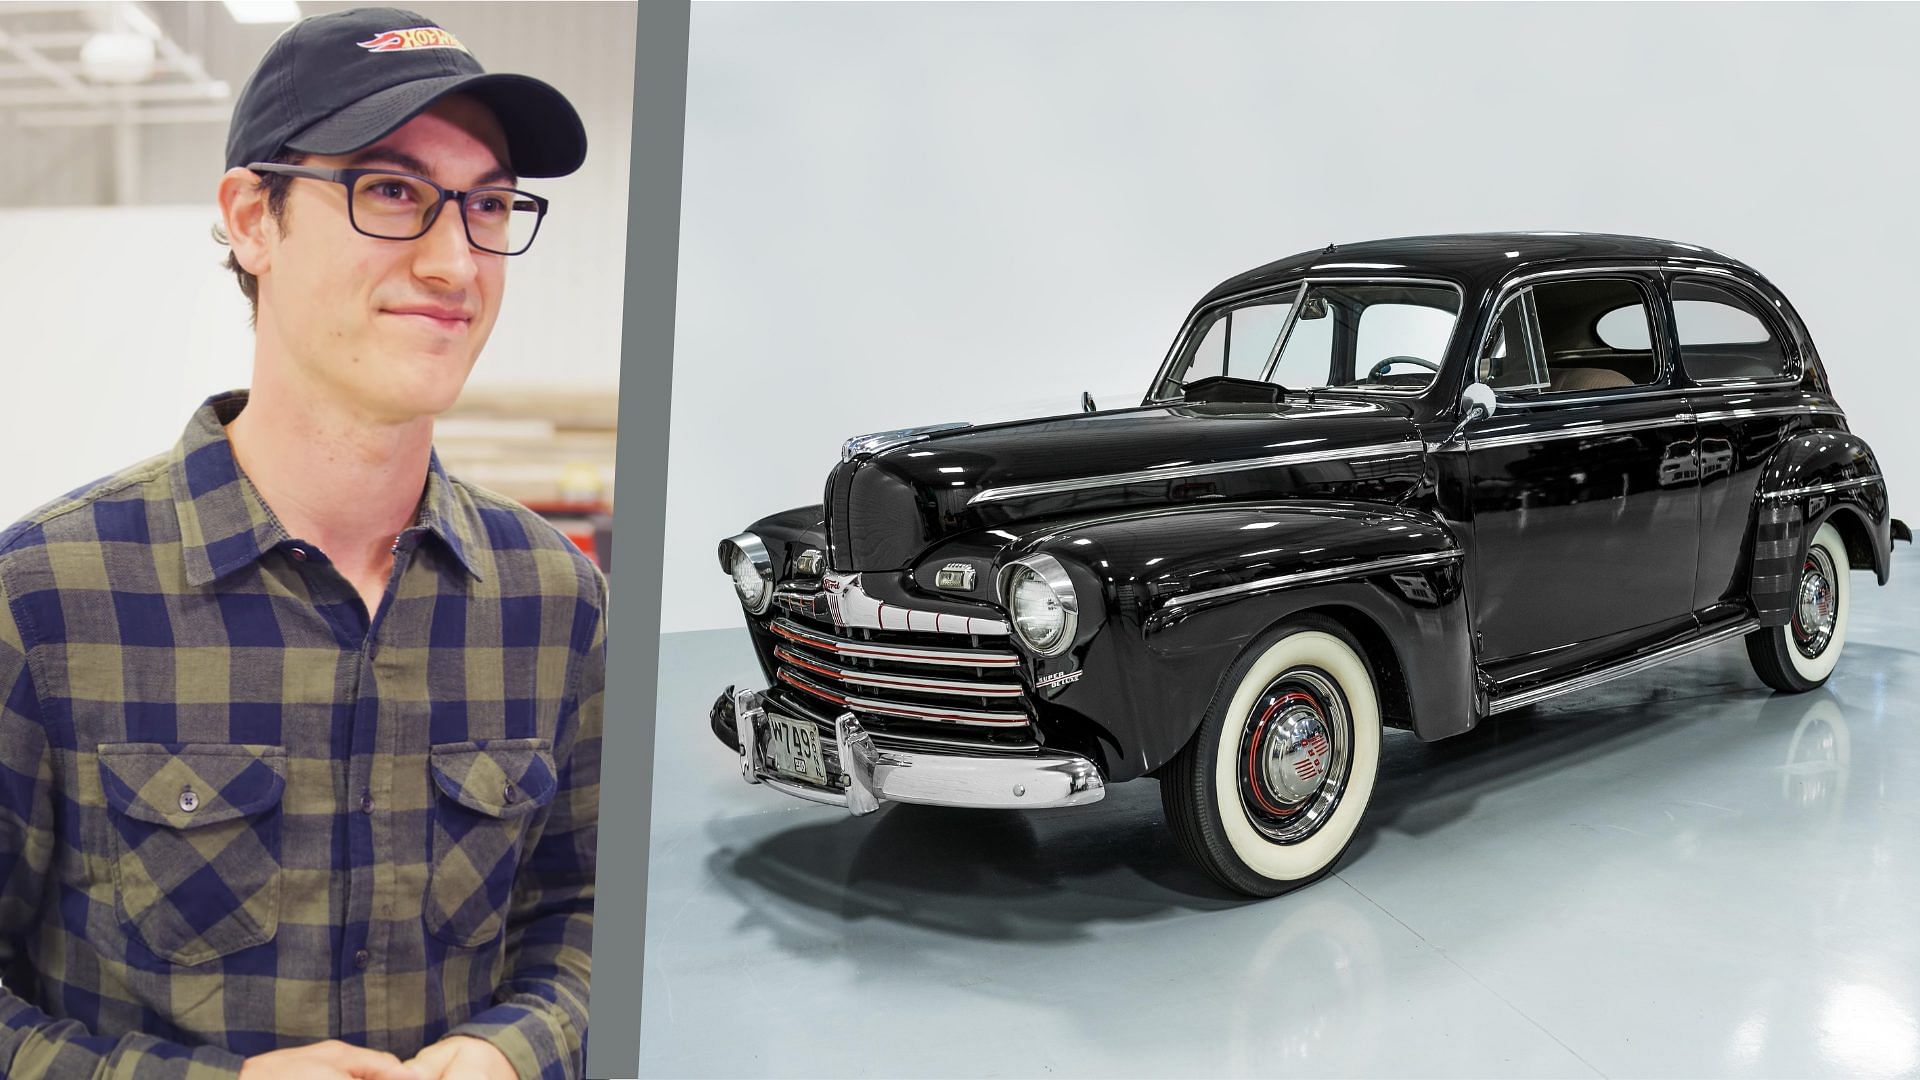 Joey Logano and his 1946 Ford Super Deluxe Sedan